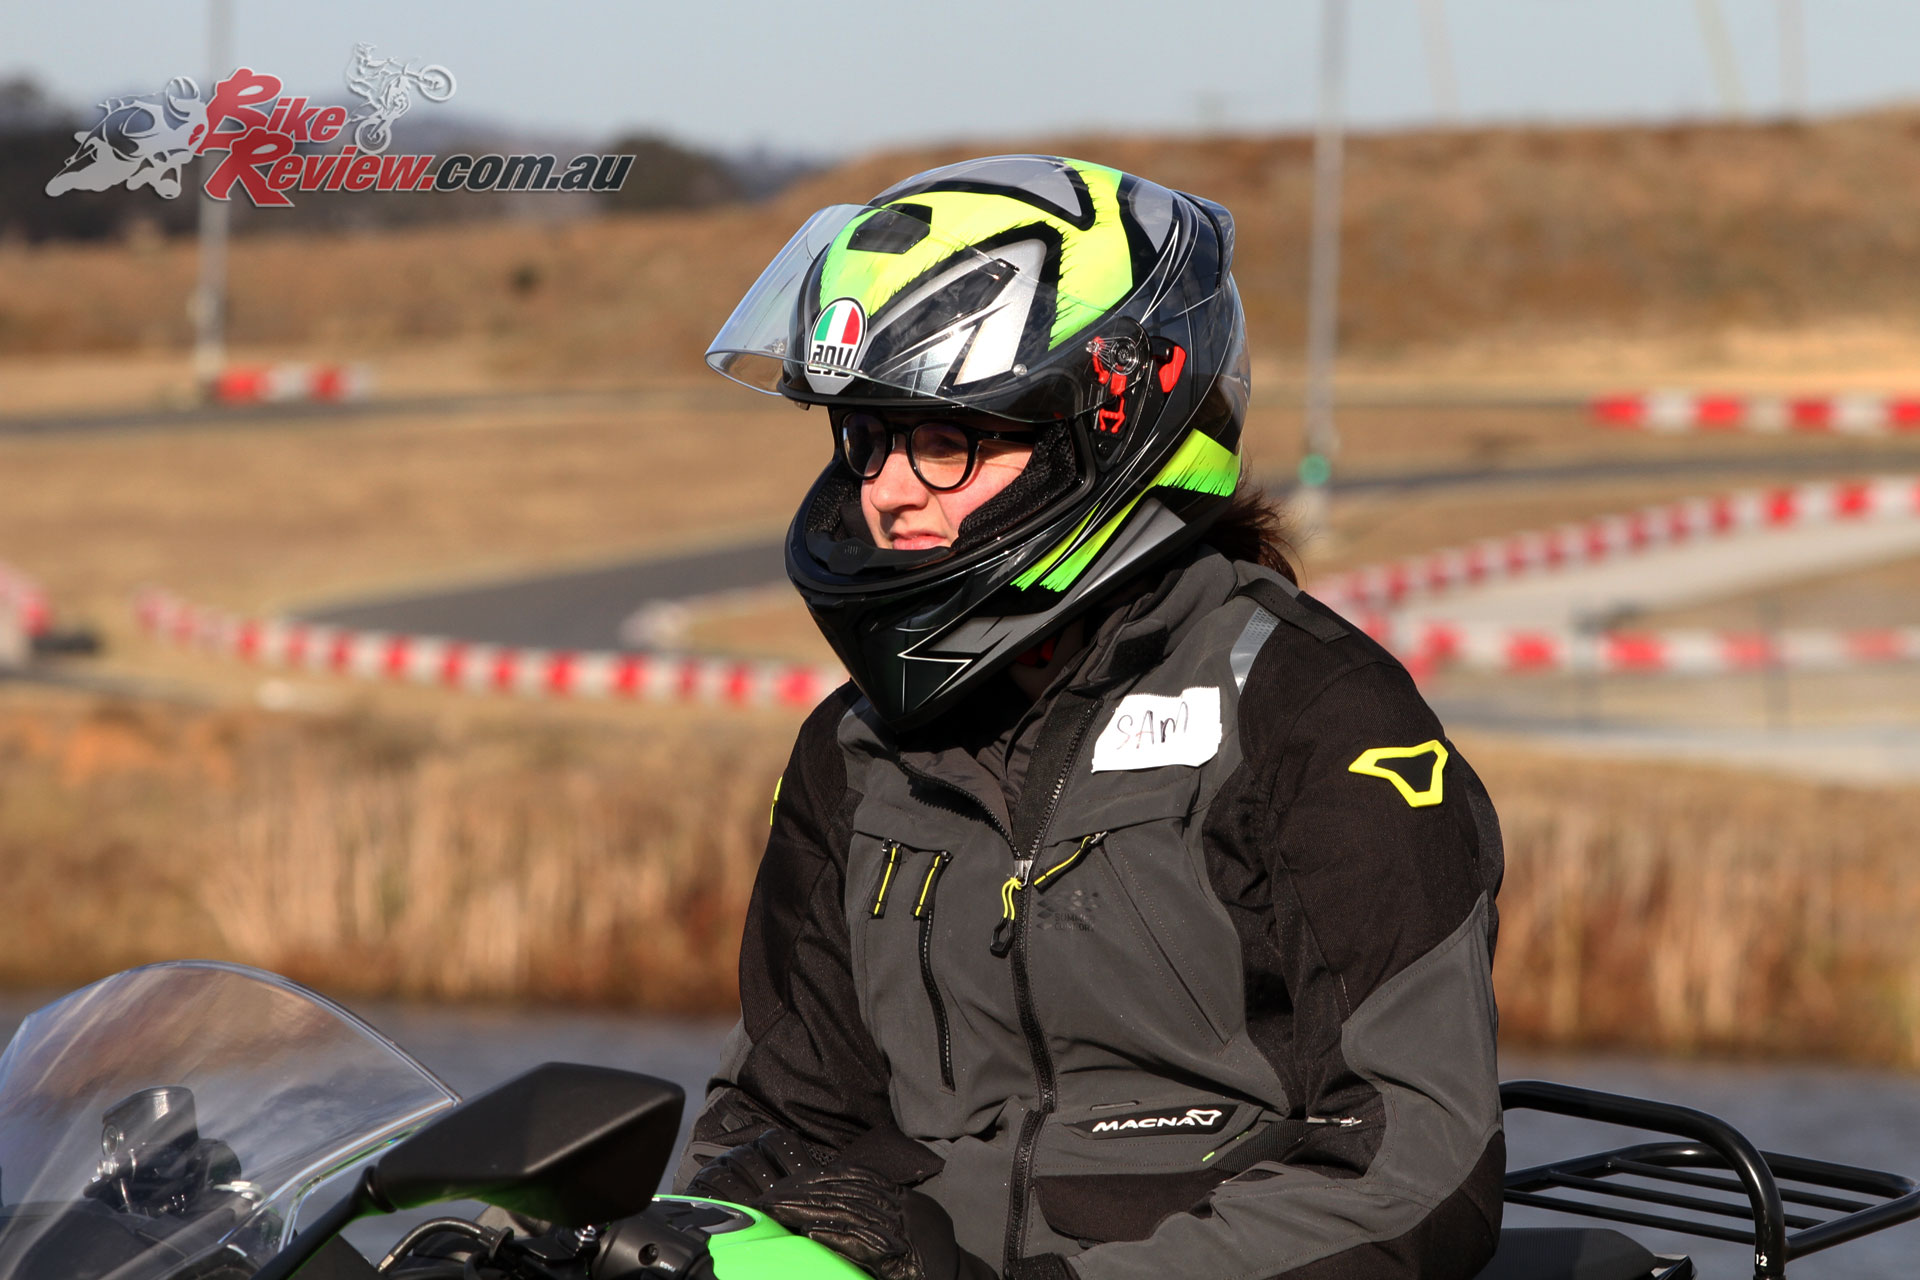 The AGV K-3 SV got some extensive use with a full day riding at the Top Rider Level 1 course